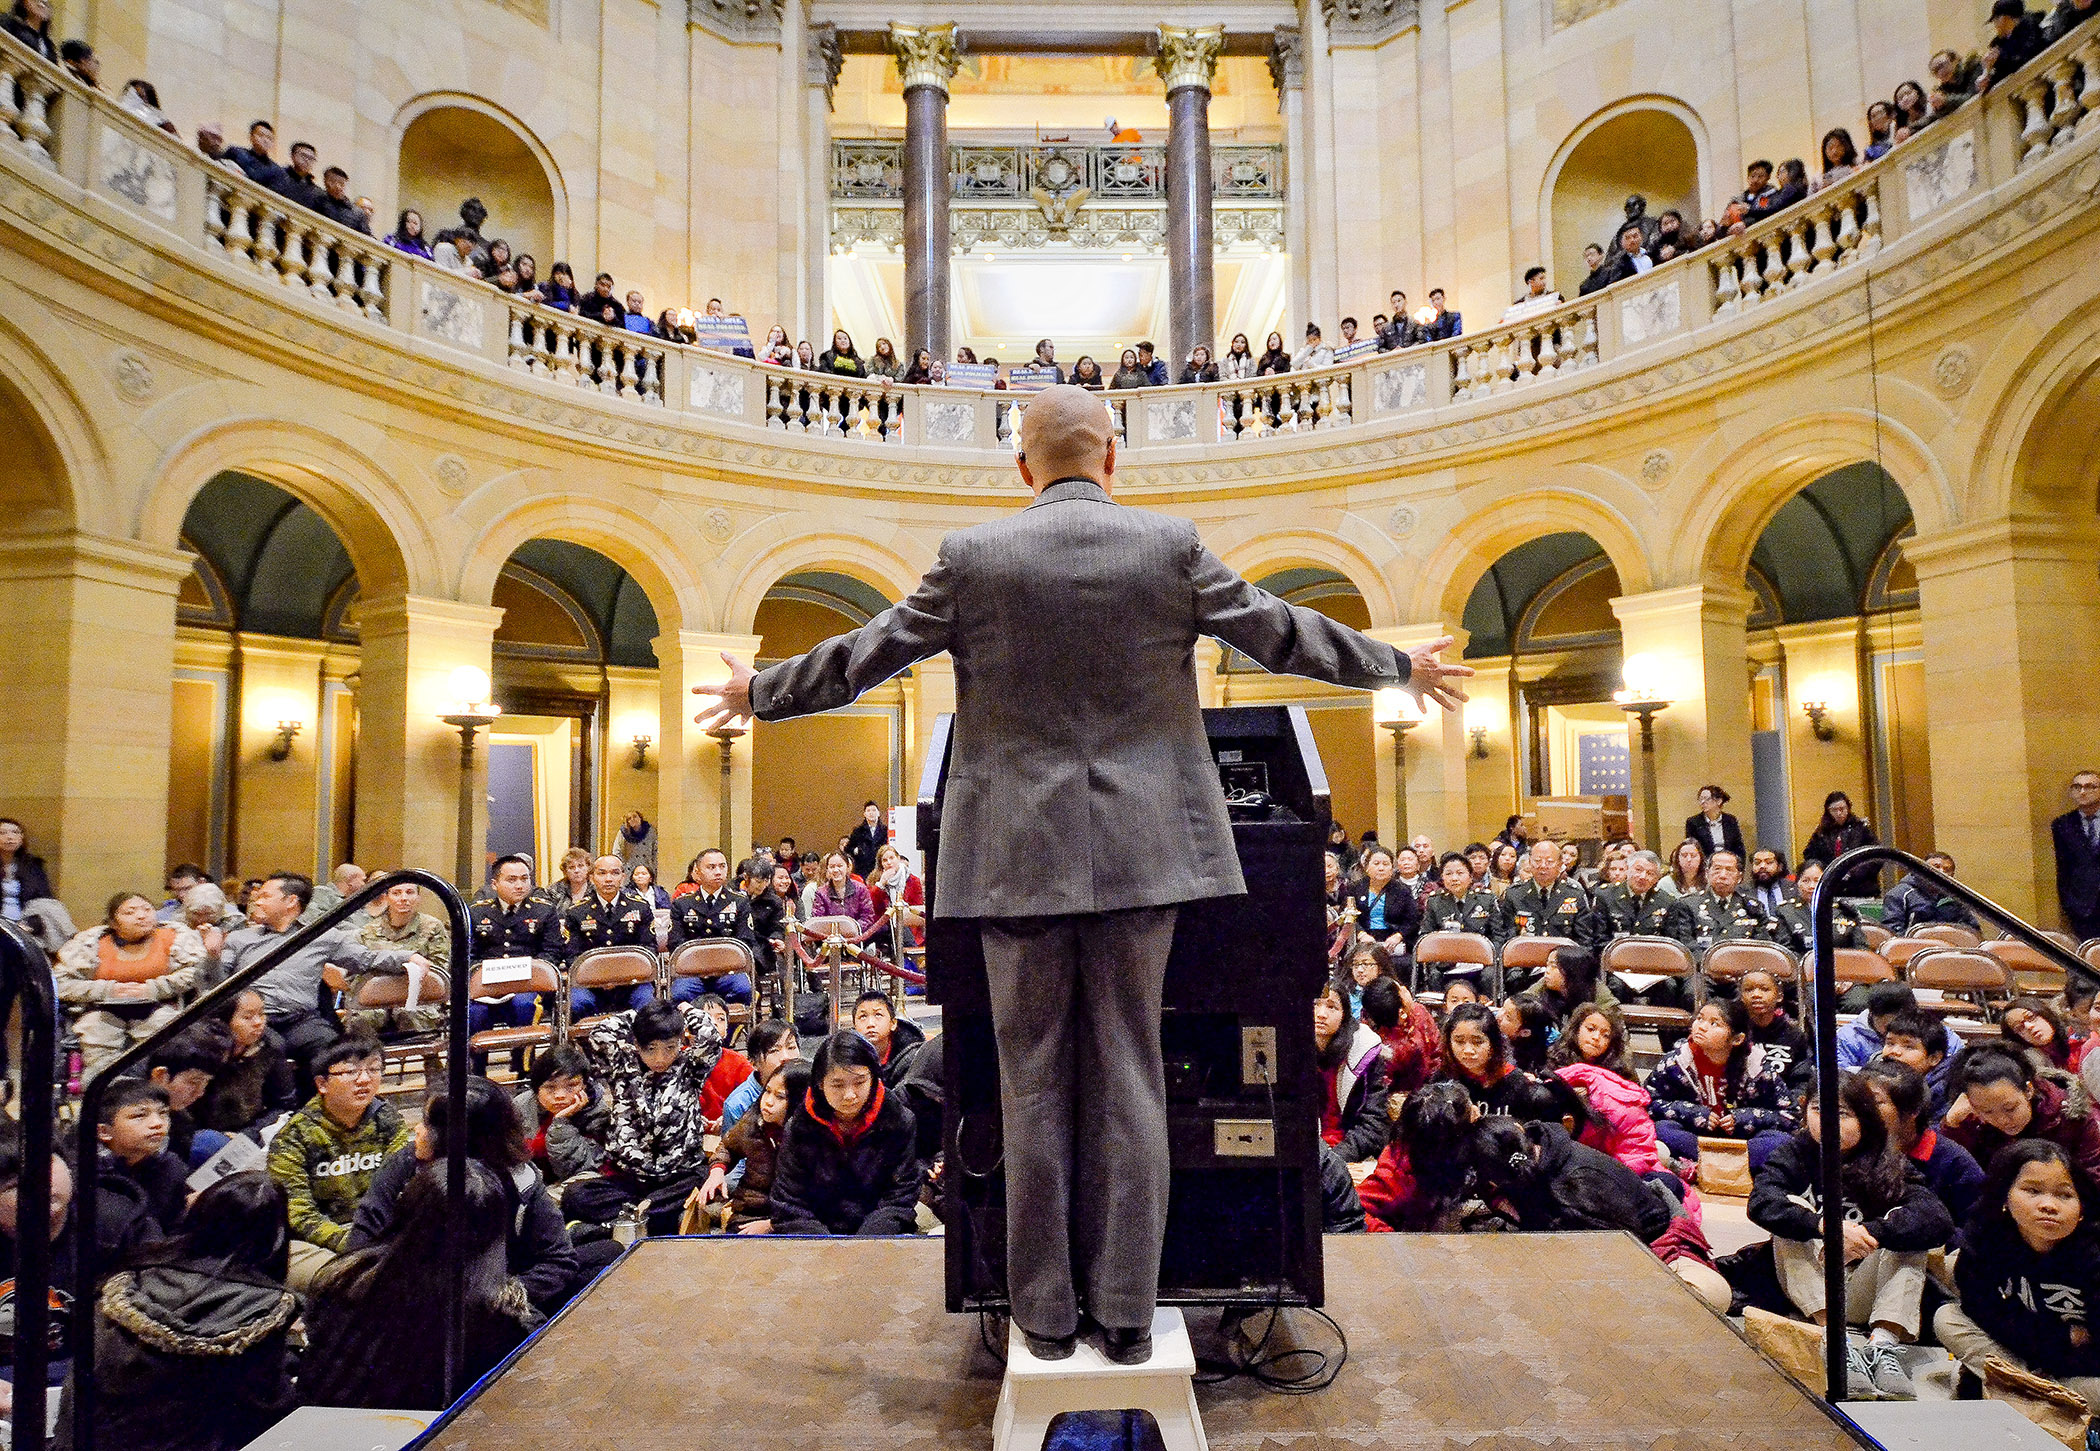 David Maeda, chair of the Council on Asian Pacific Minnesotans Community Board, gives closing remarks to the hundreds of people who gathered in the Capitol Rotunda Feb. 8 for API Day at the Capitol. Photo by Andrew VonBank